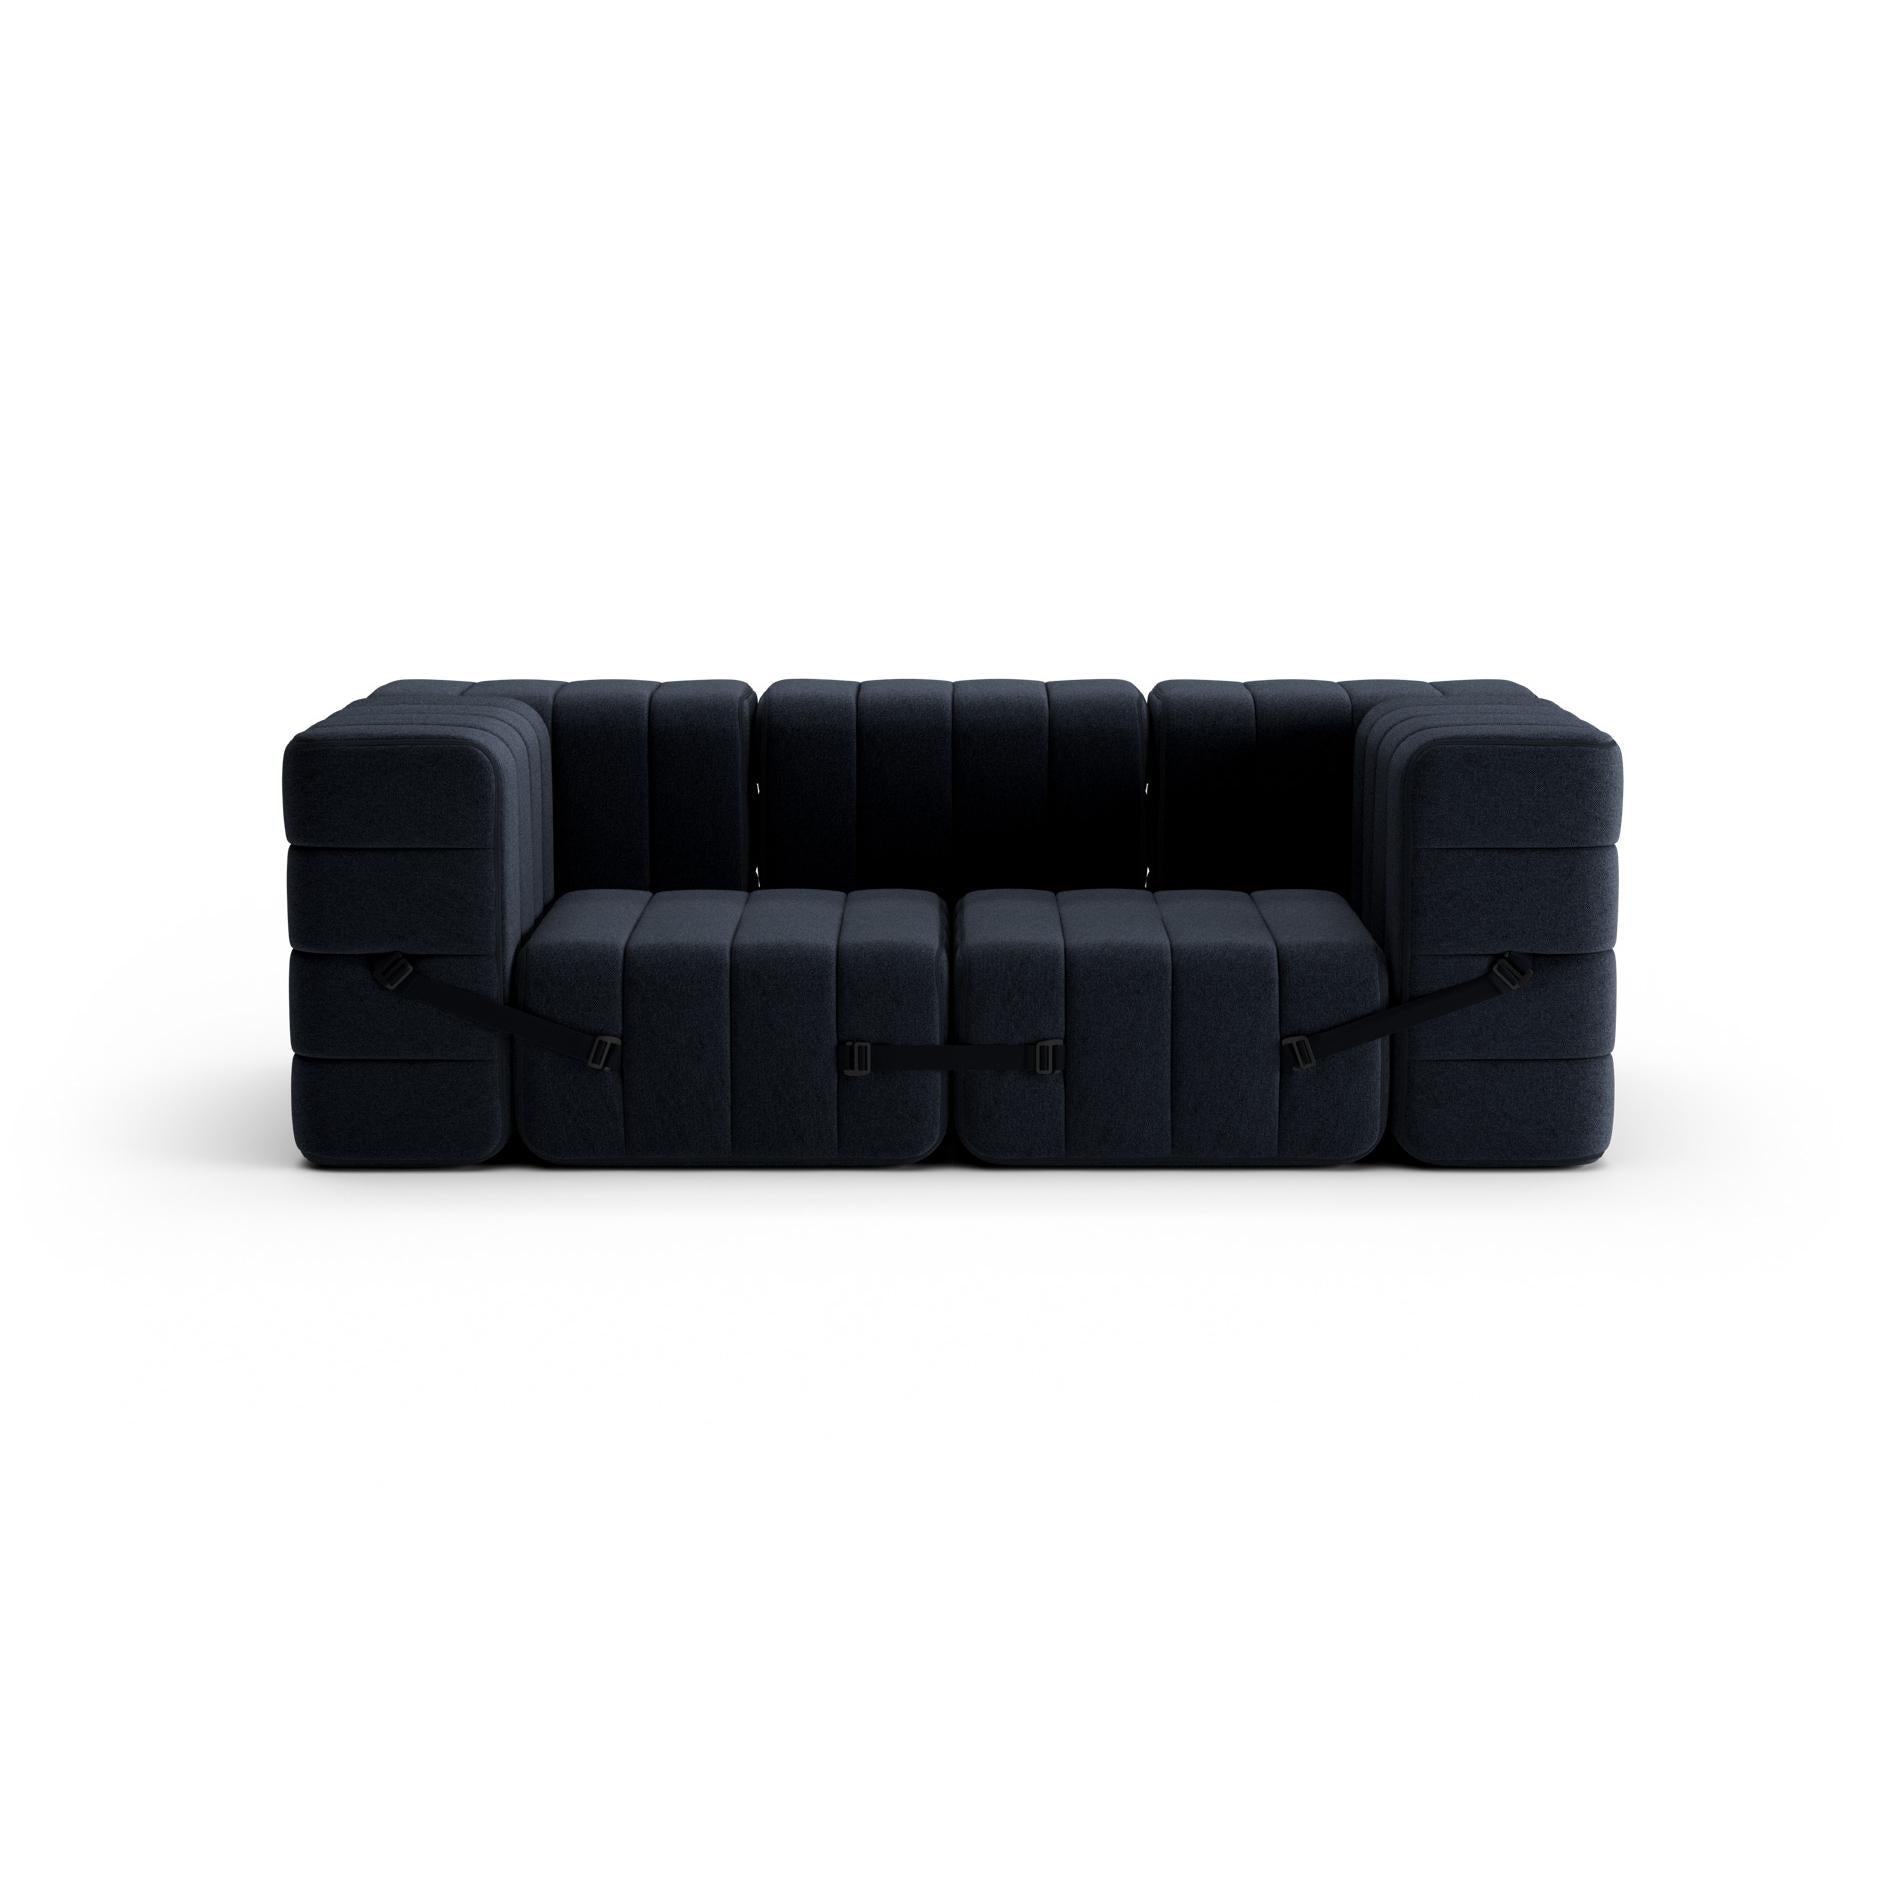 Pouf, Stool, Ottoman - Or Simply the Basic Component for Probably the Most Flexible Sofa System in the World?

The Curt single module is of course also a wonderful pouf. Or a useful ottoman. The Curt single module also makes a splendid simple,